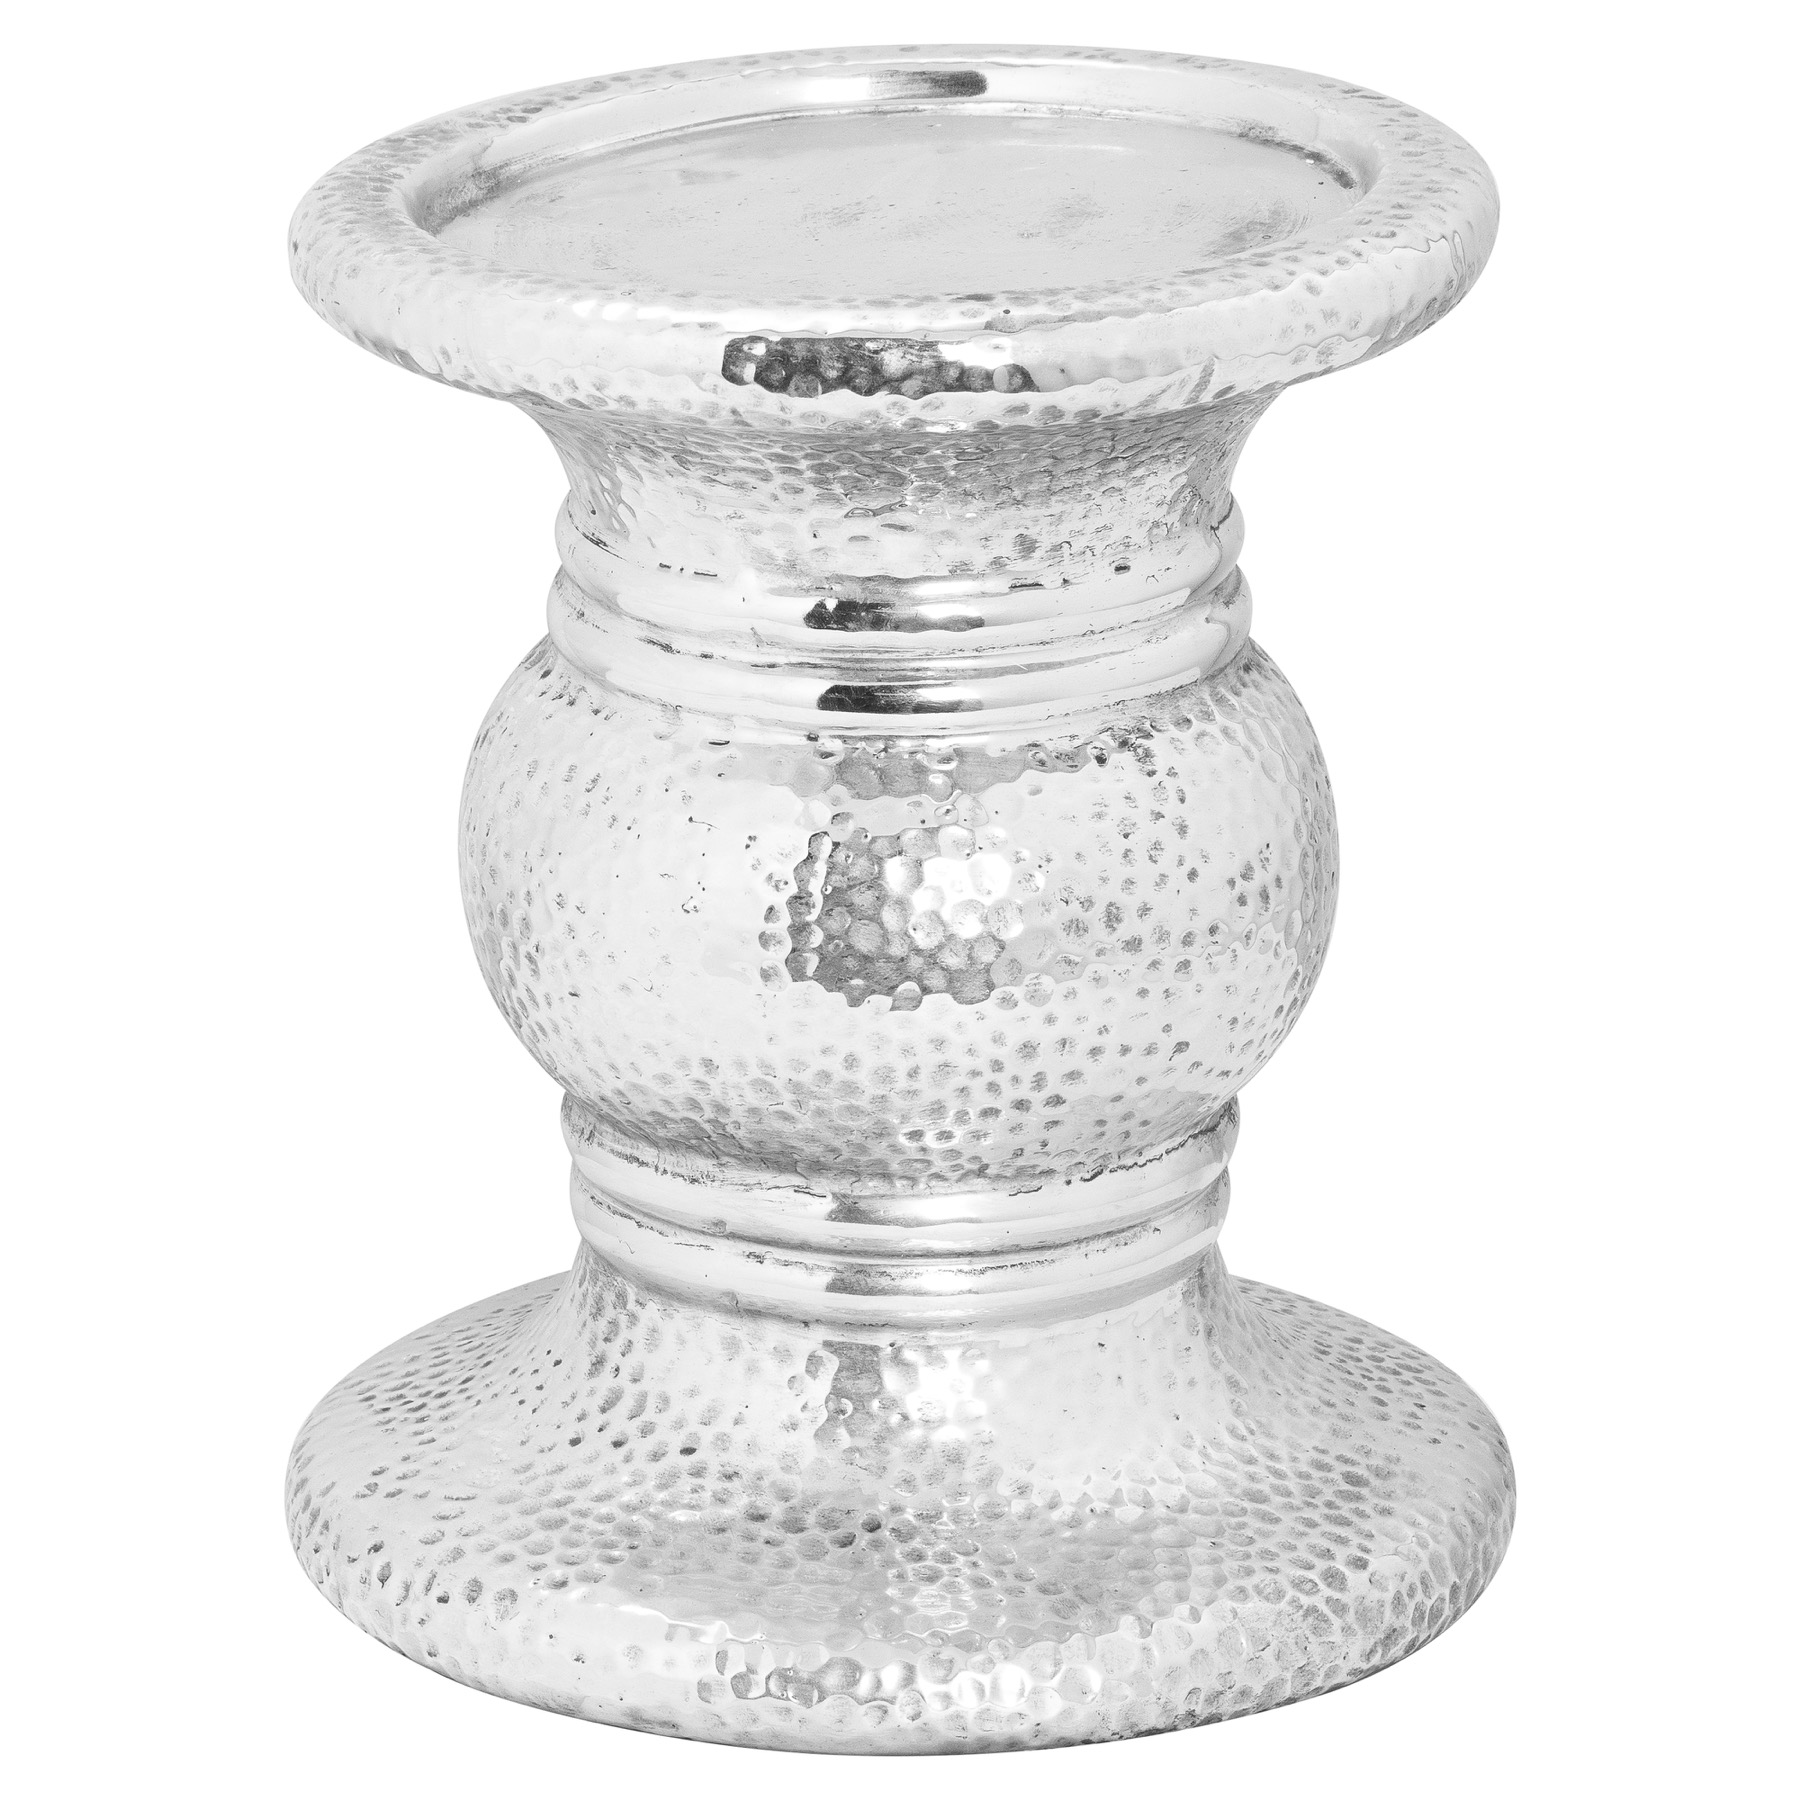 Silver Punch Faced Ceramic Large Candle Holder - Image 1